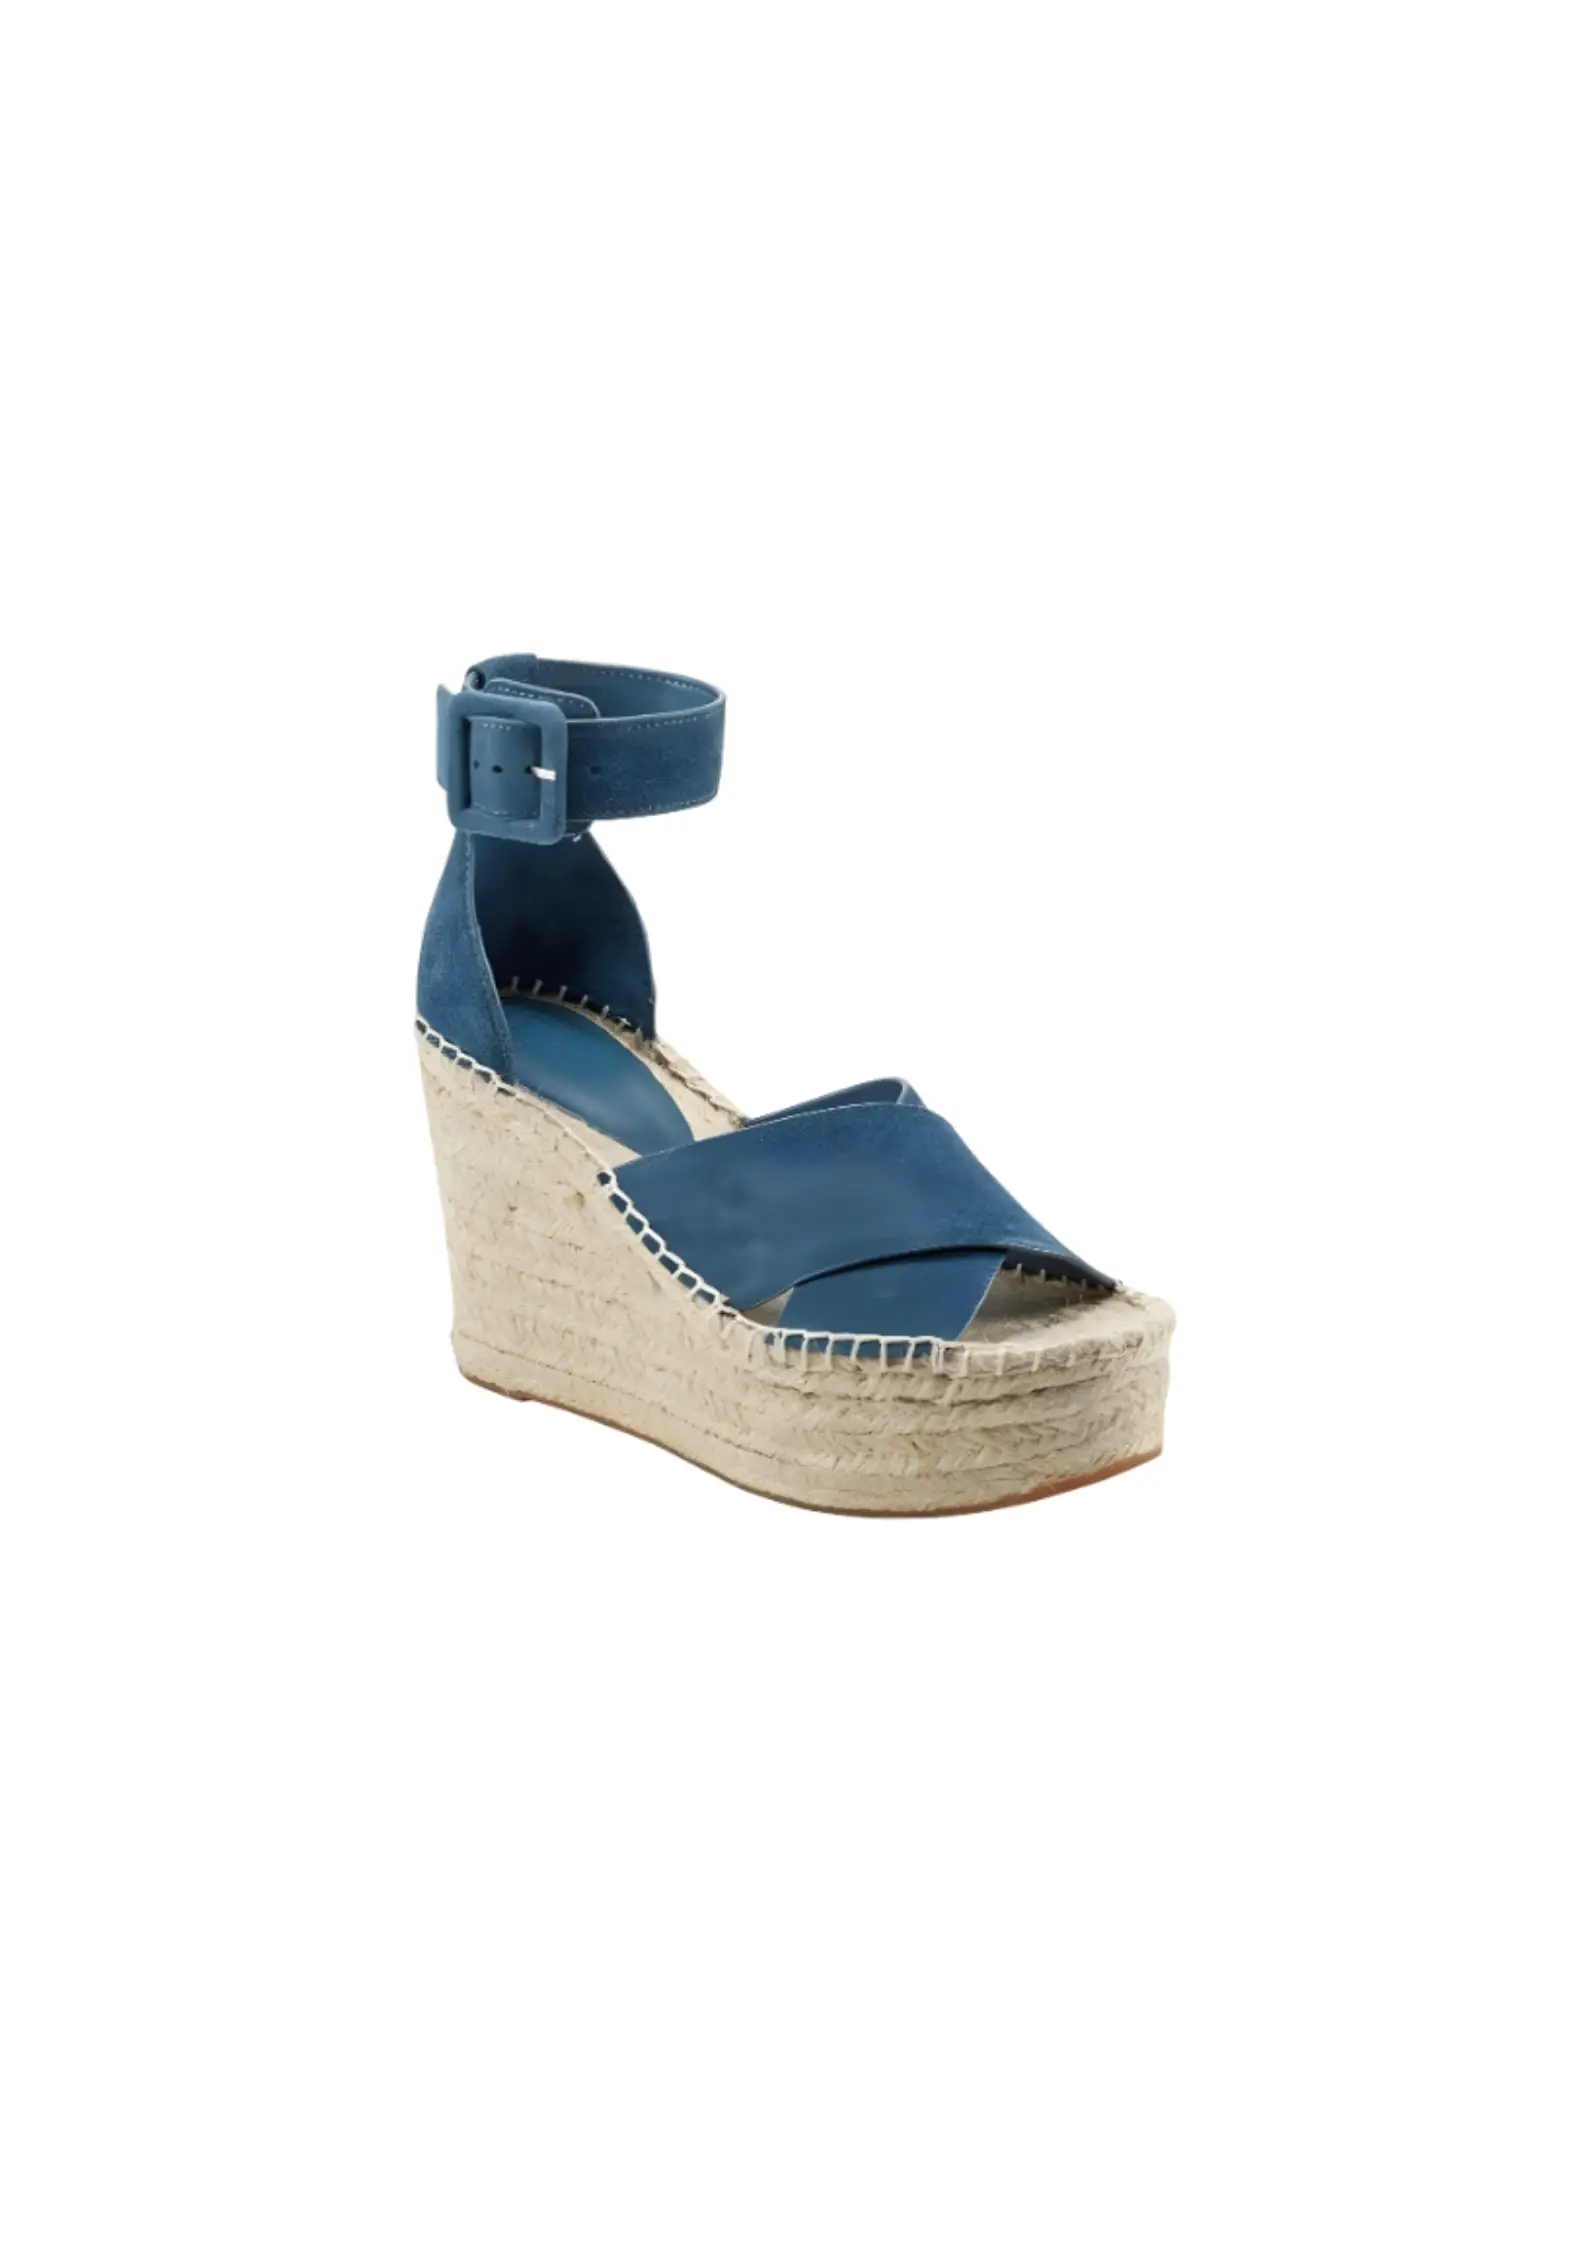 Marc Fisher Women's Able Wedge Sandals